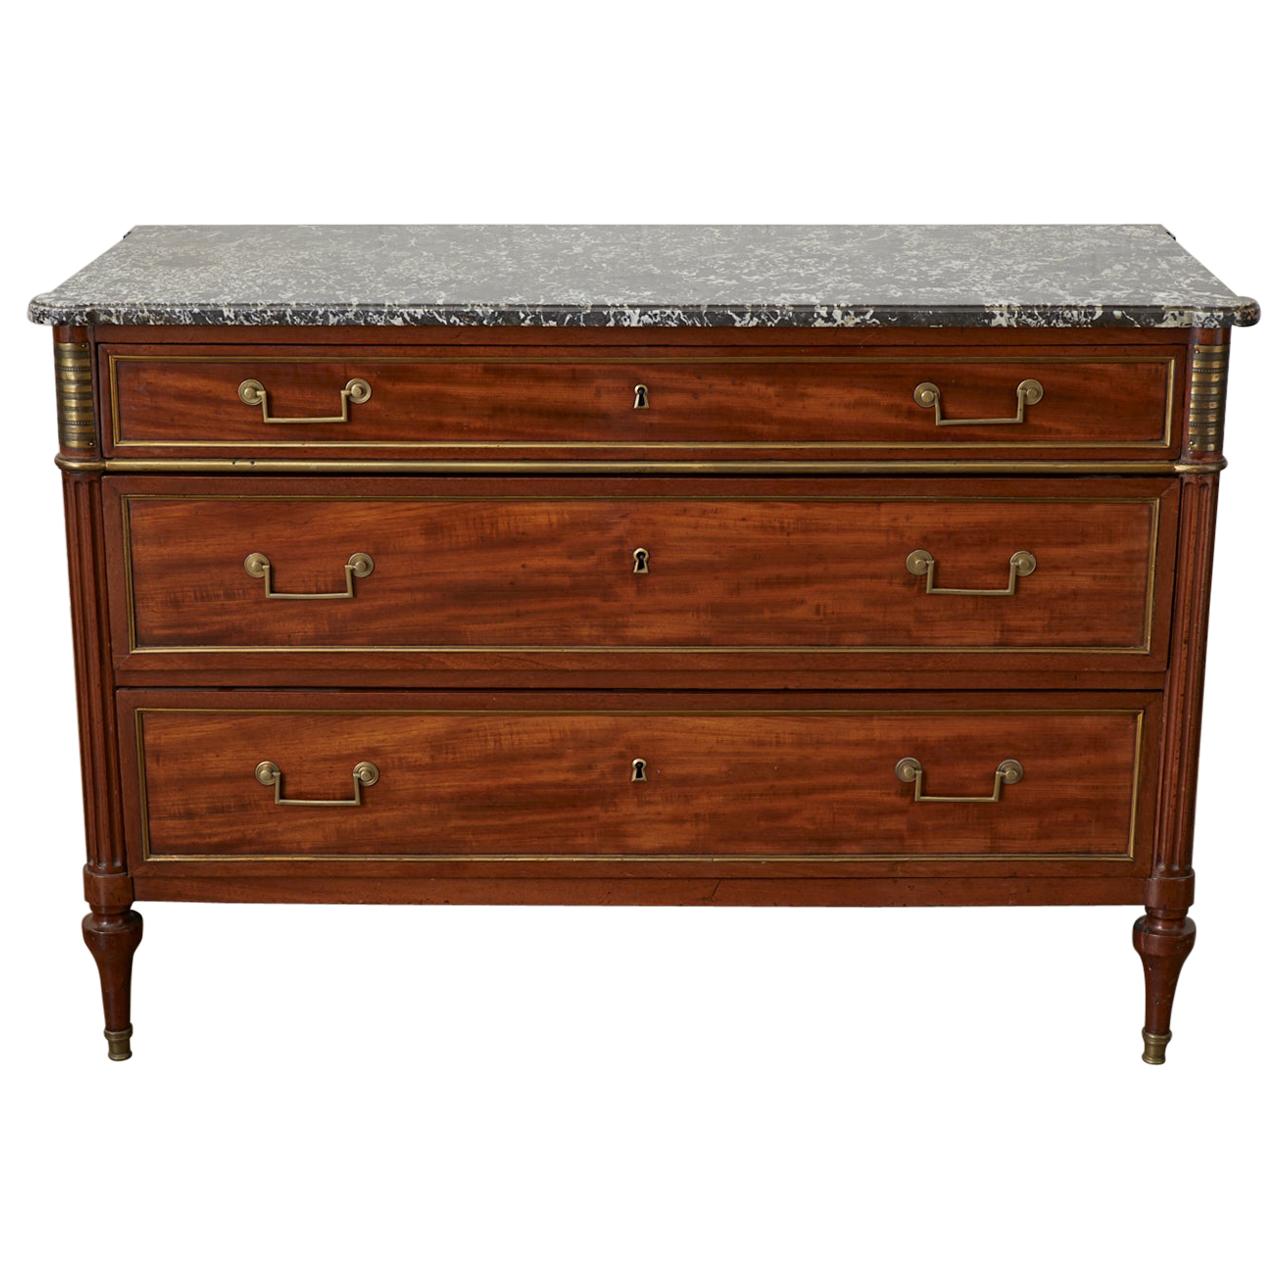 French Louis XVI Style Mahogany Marble-Top Commode